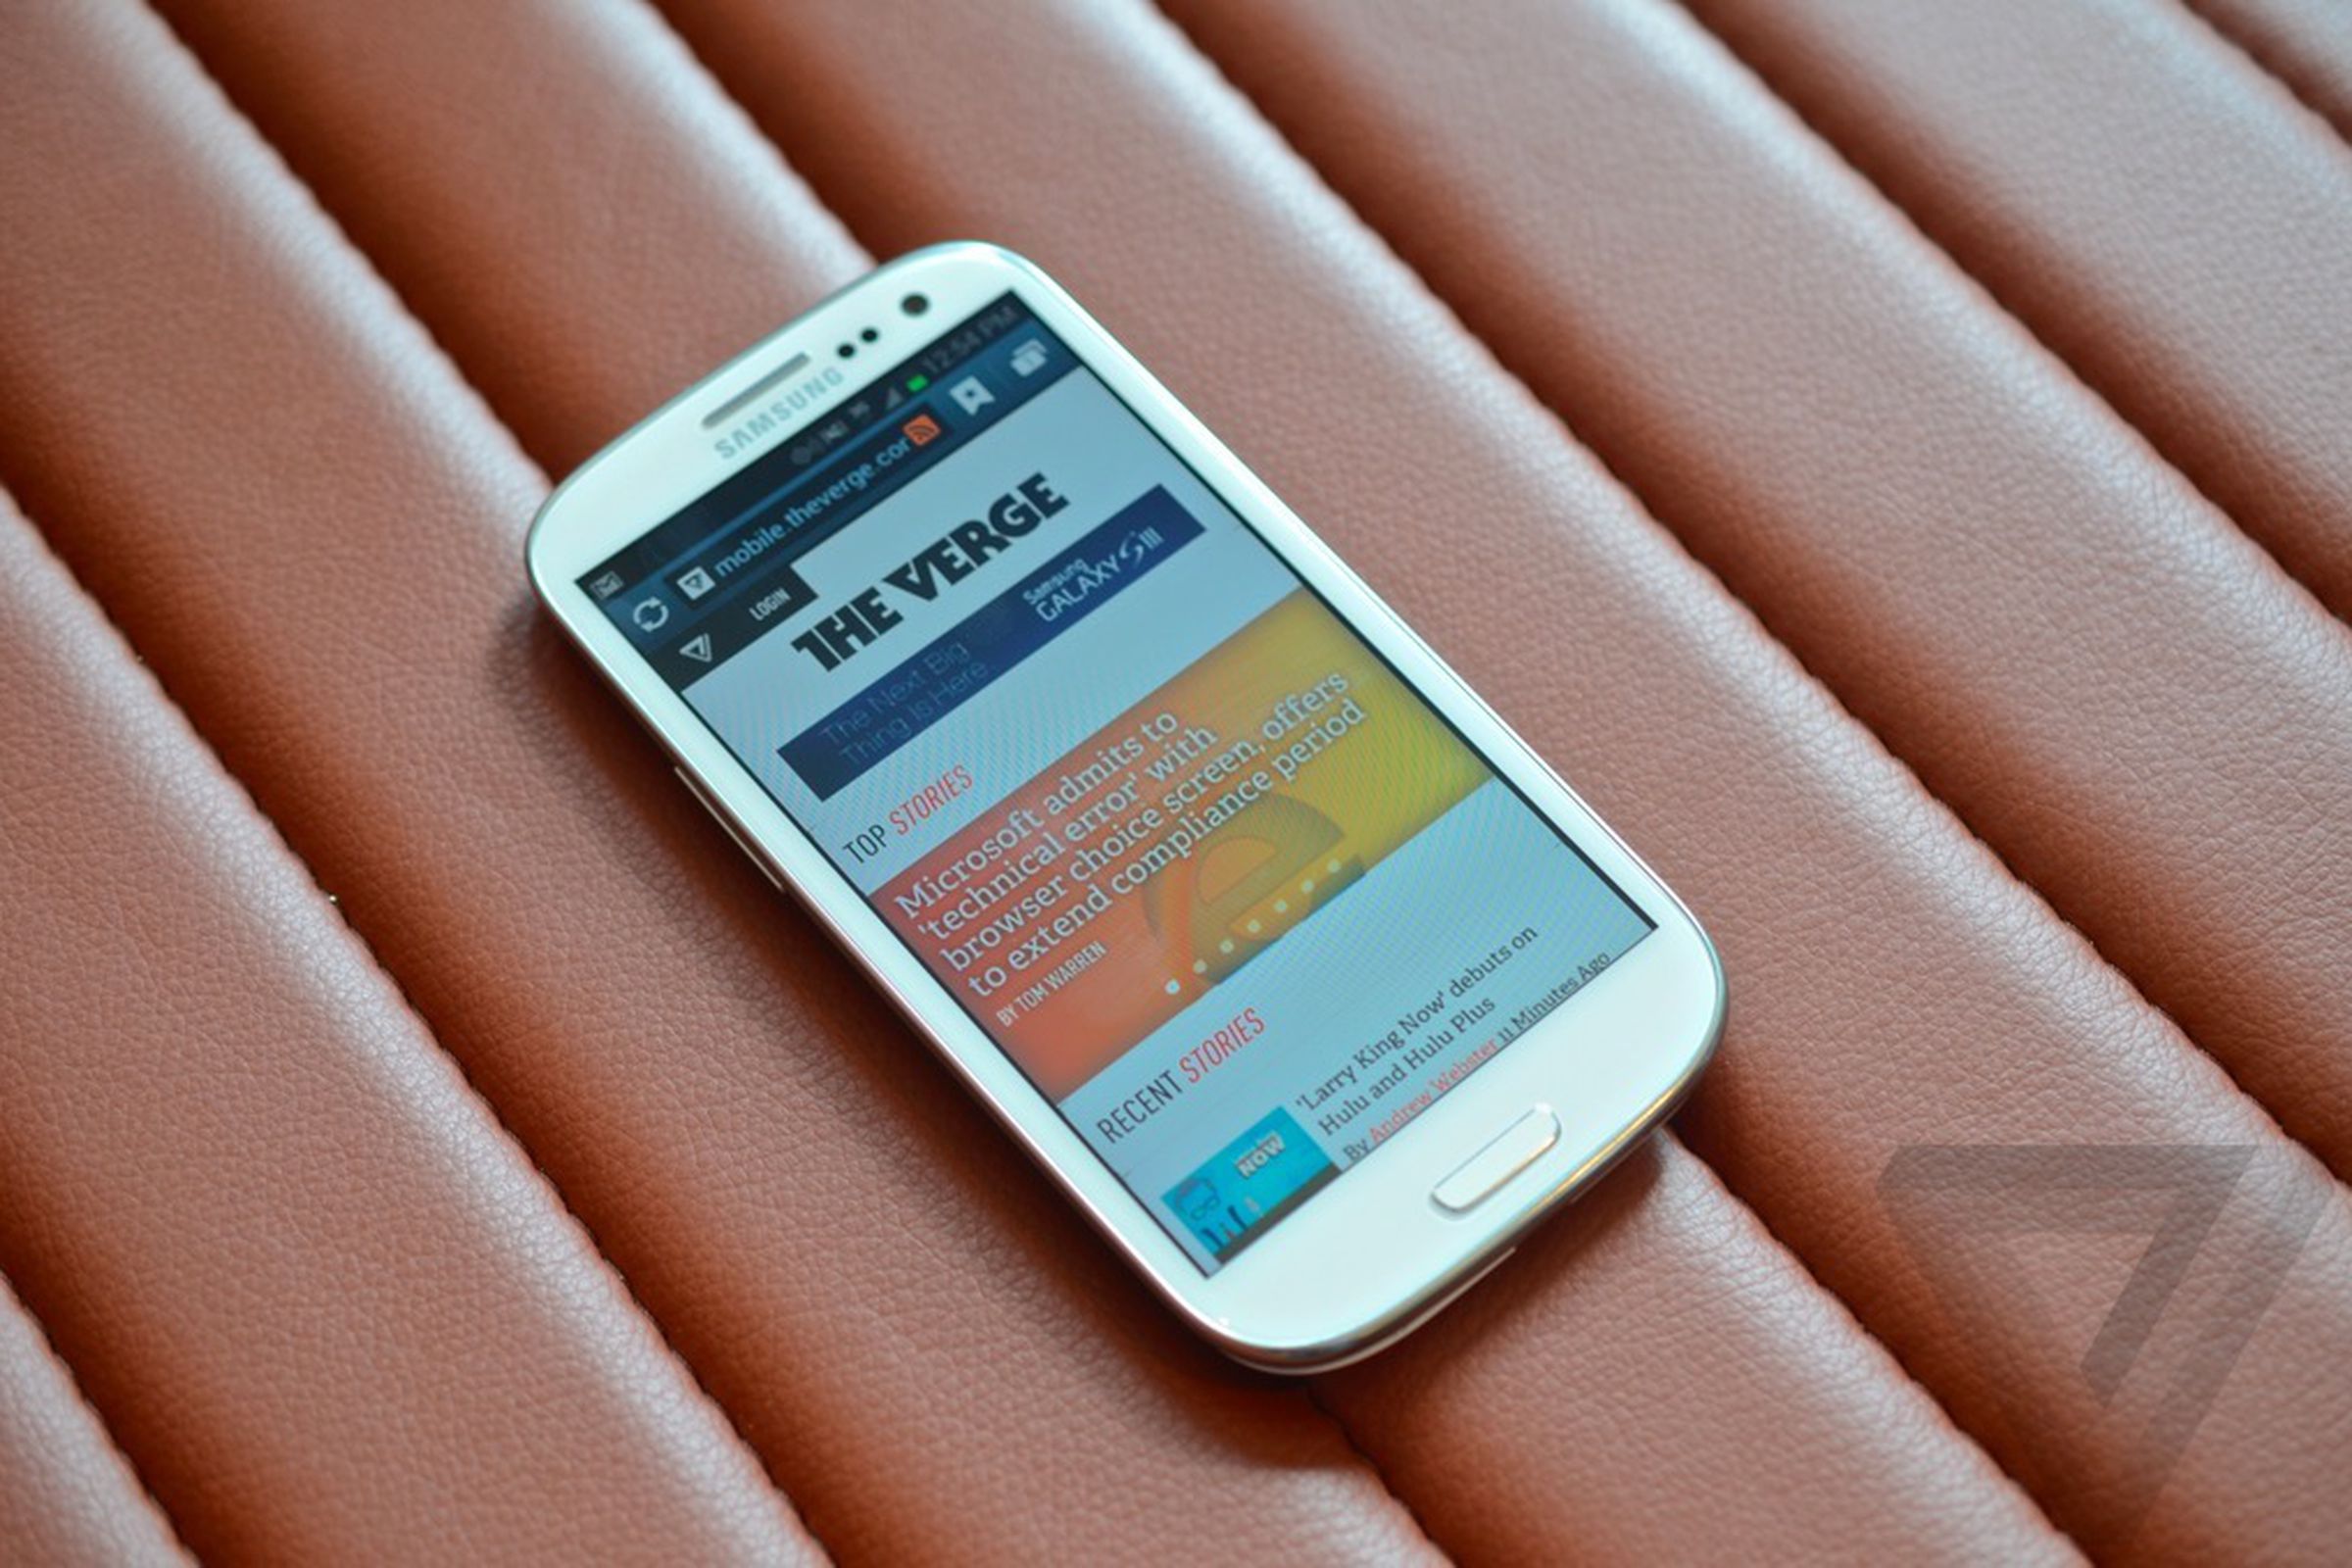 Gallery Photo: Samsung Galaxy S III for Verizon hands-on pictures